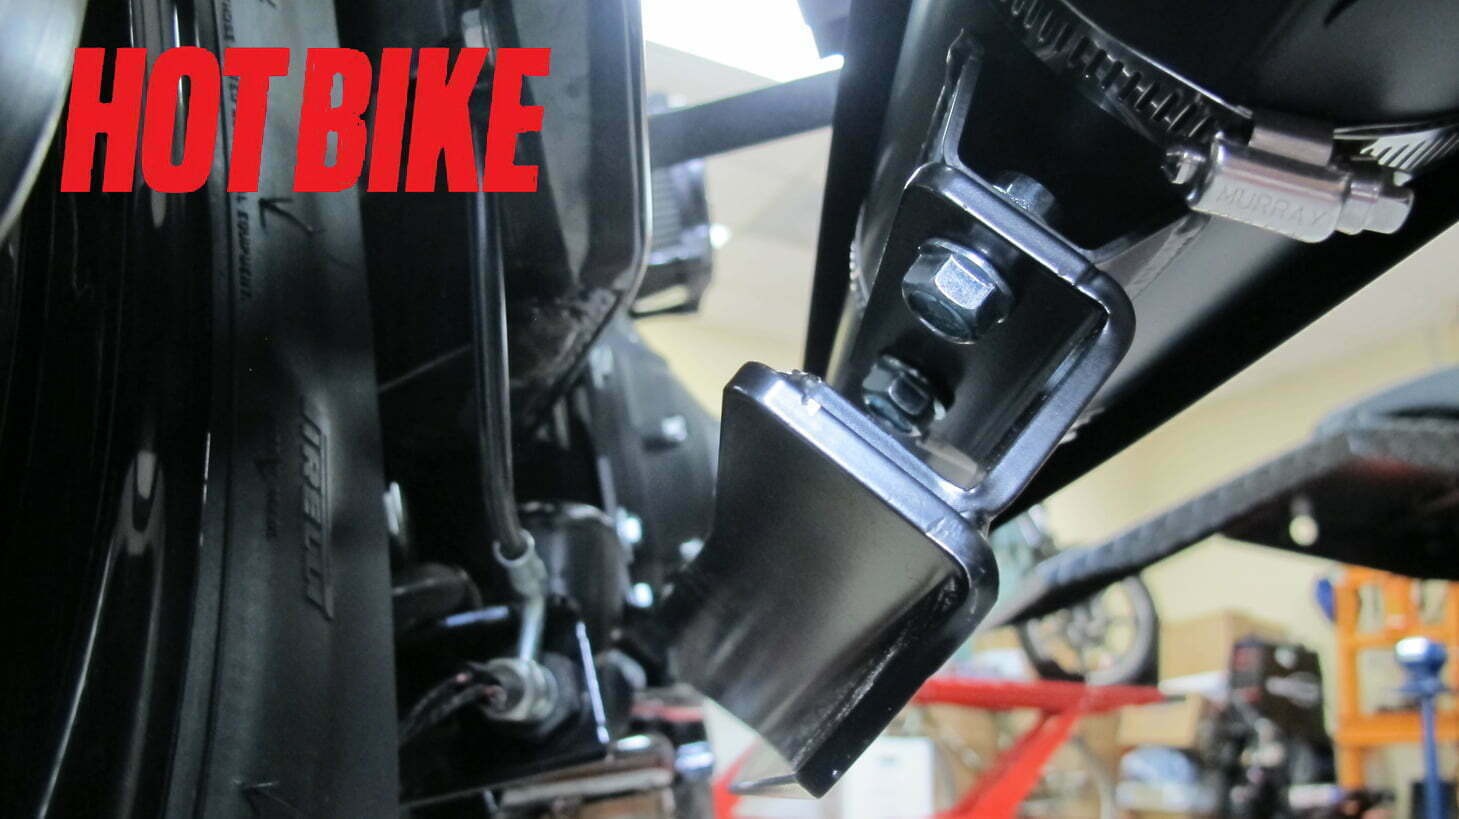 Vance & Hines Pro Pipe install